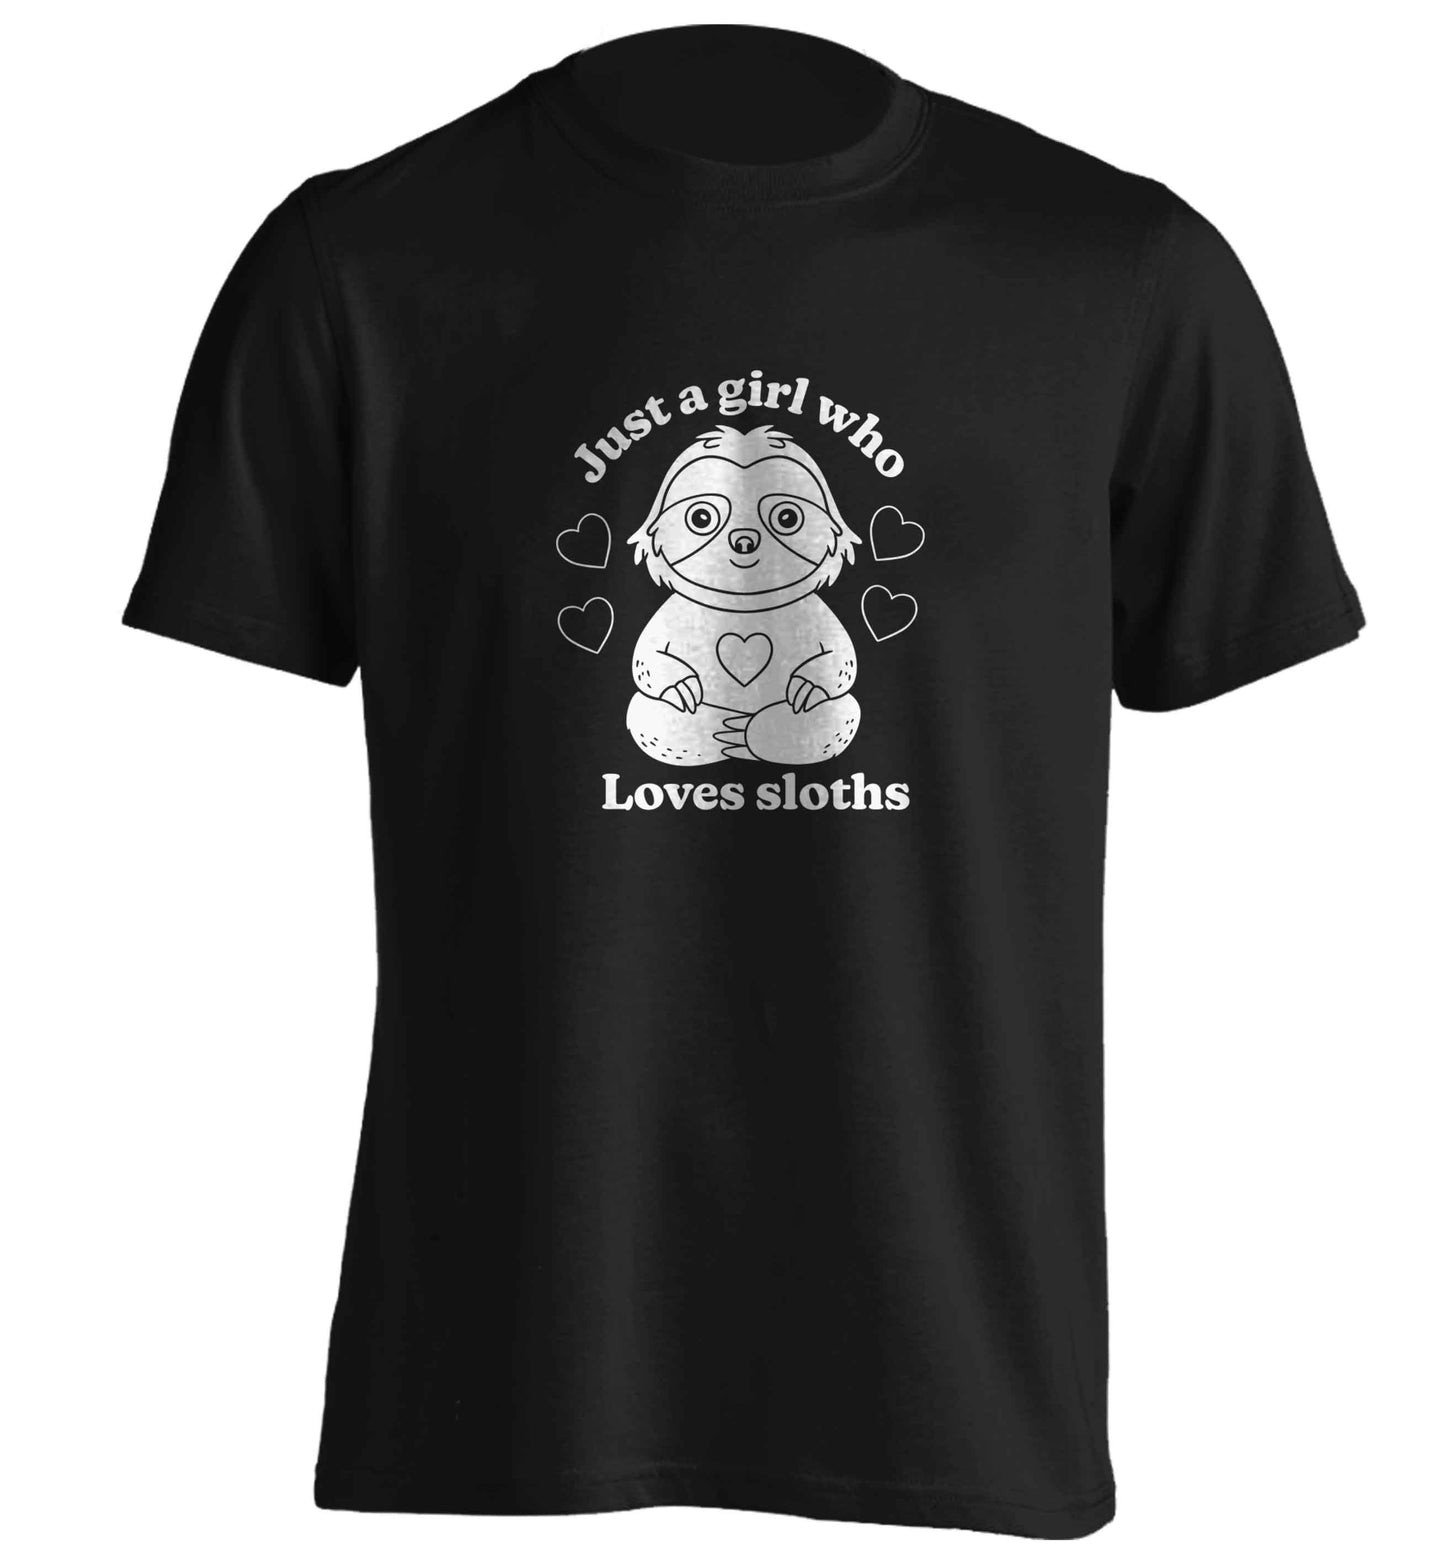 Just a girl who loves sloths adults unisex black Tshirt 2XL